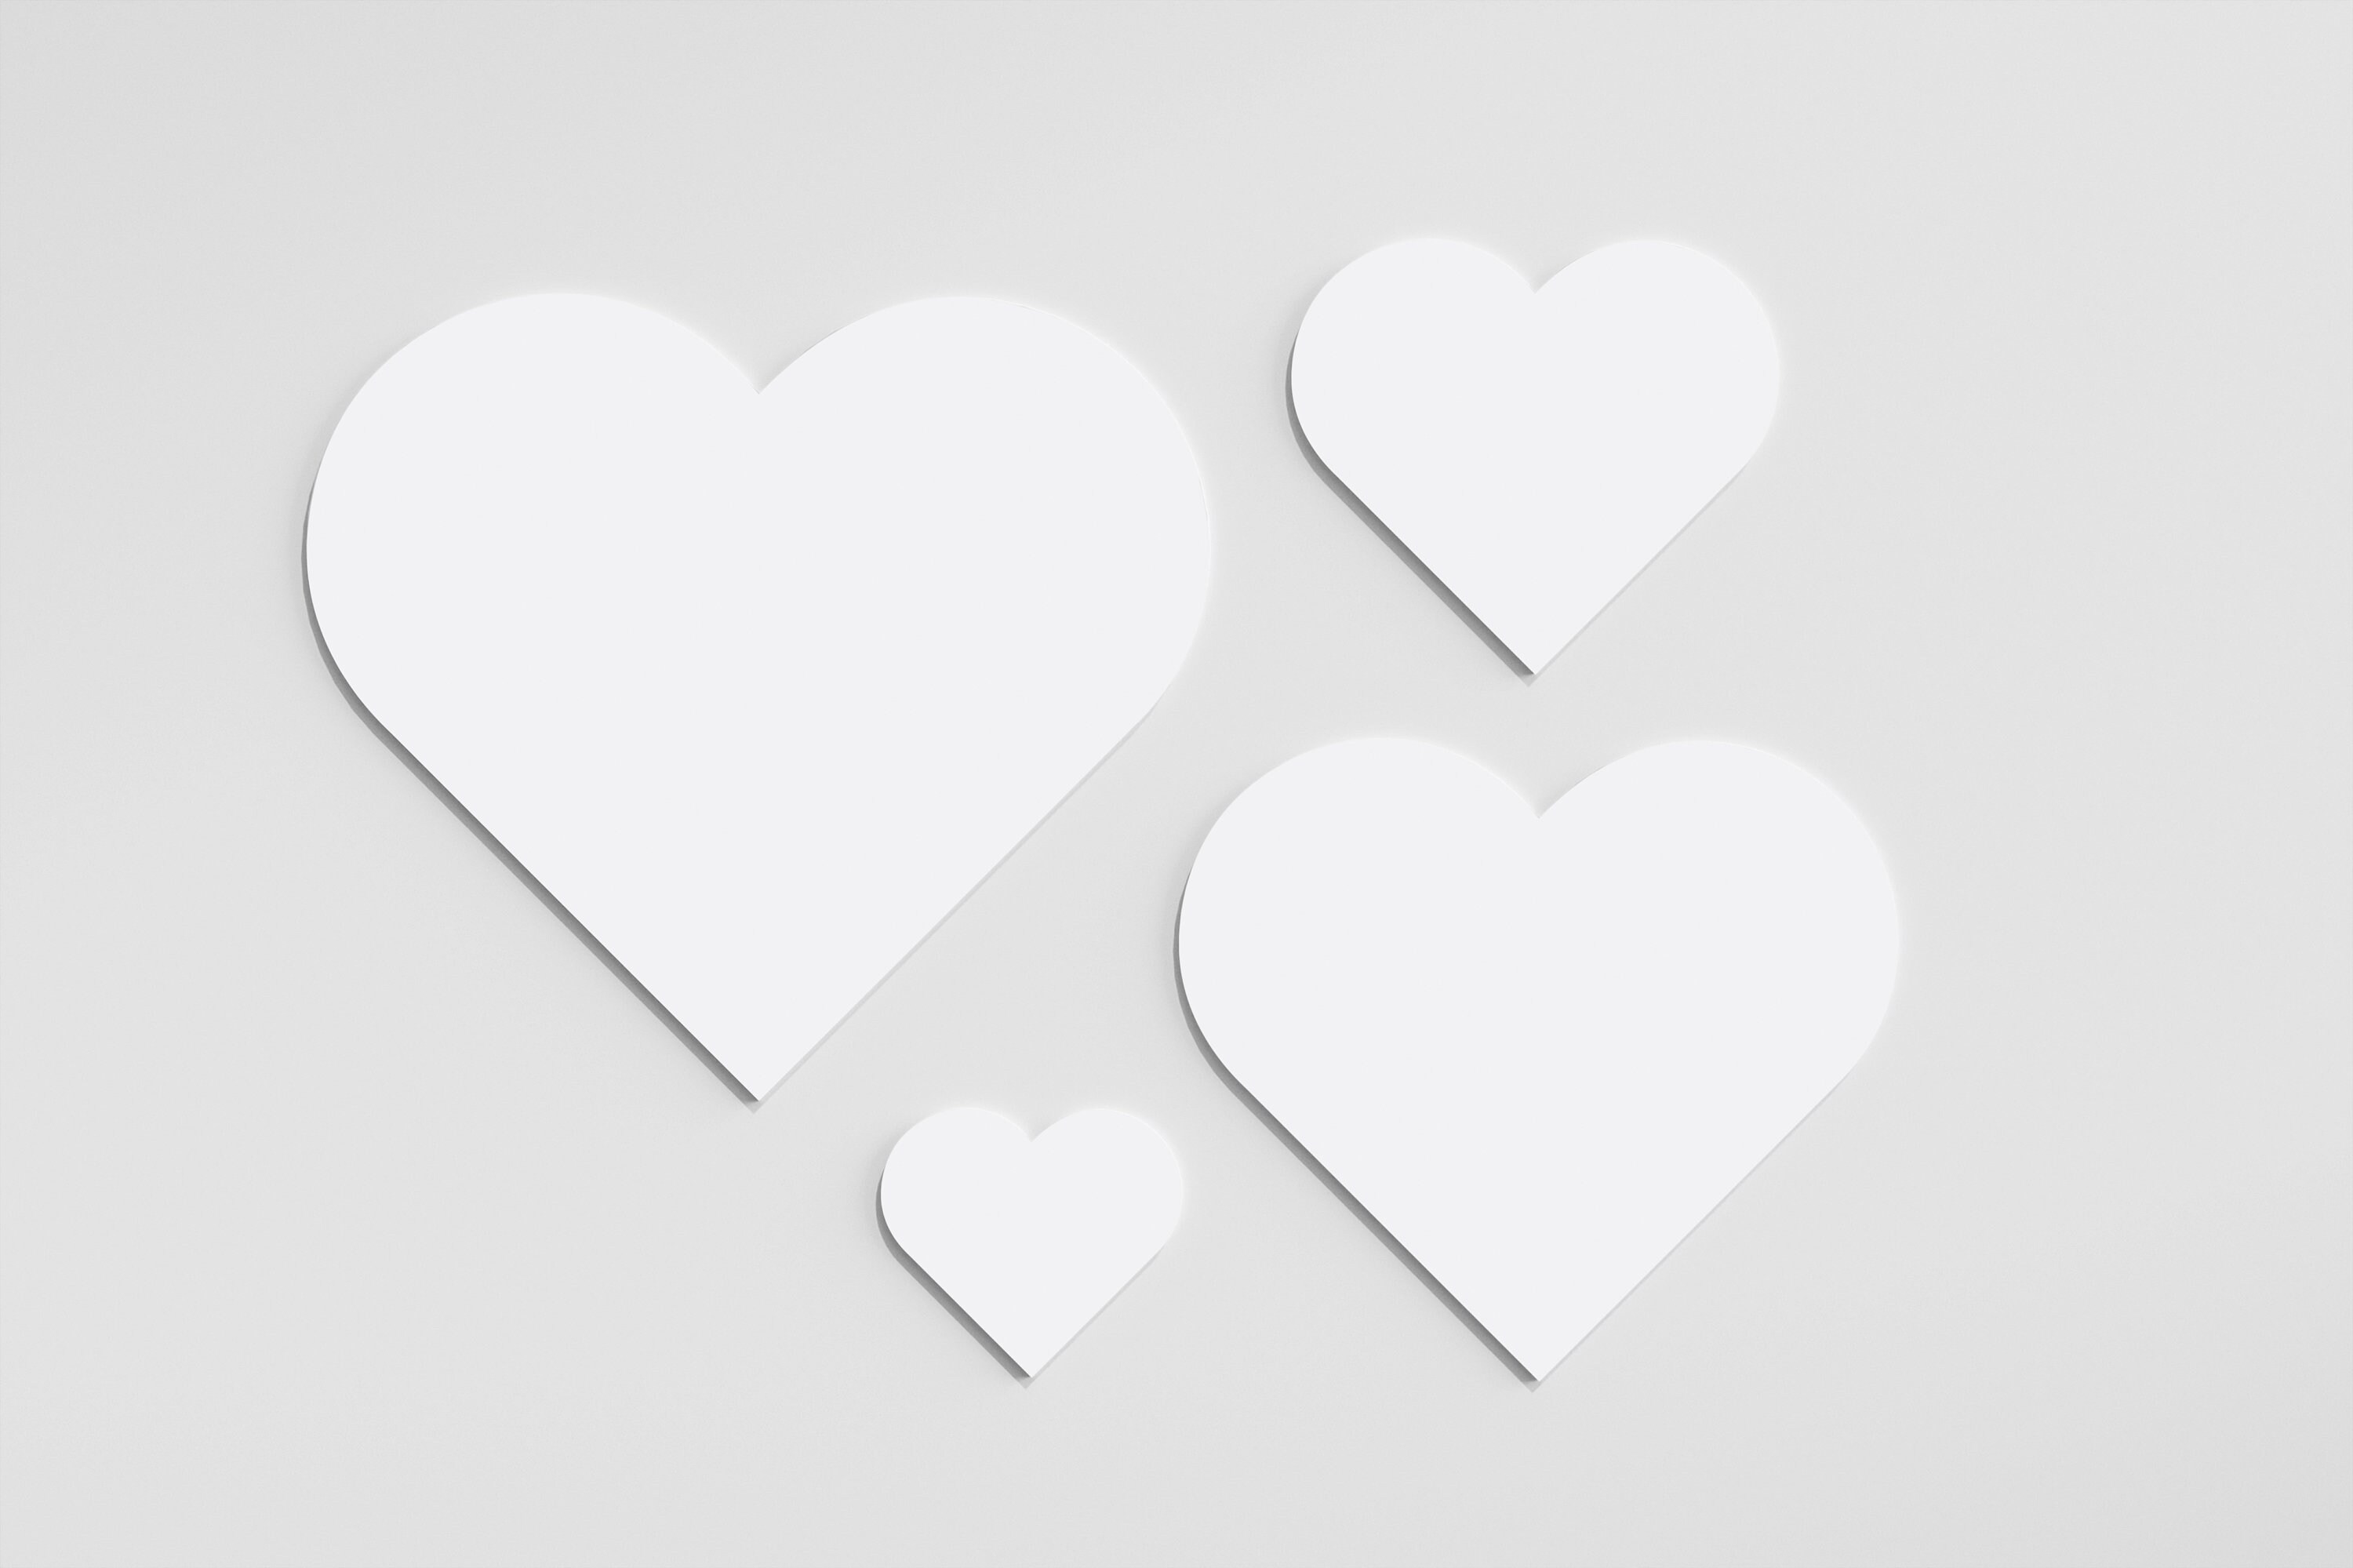 White Heart Shape Acrylic Blanks For Diy Wedding Kits & Crafts. Available in Large, Small Custom Sizes